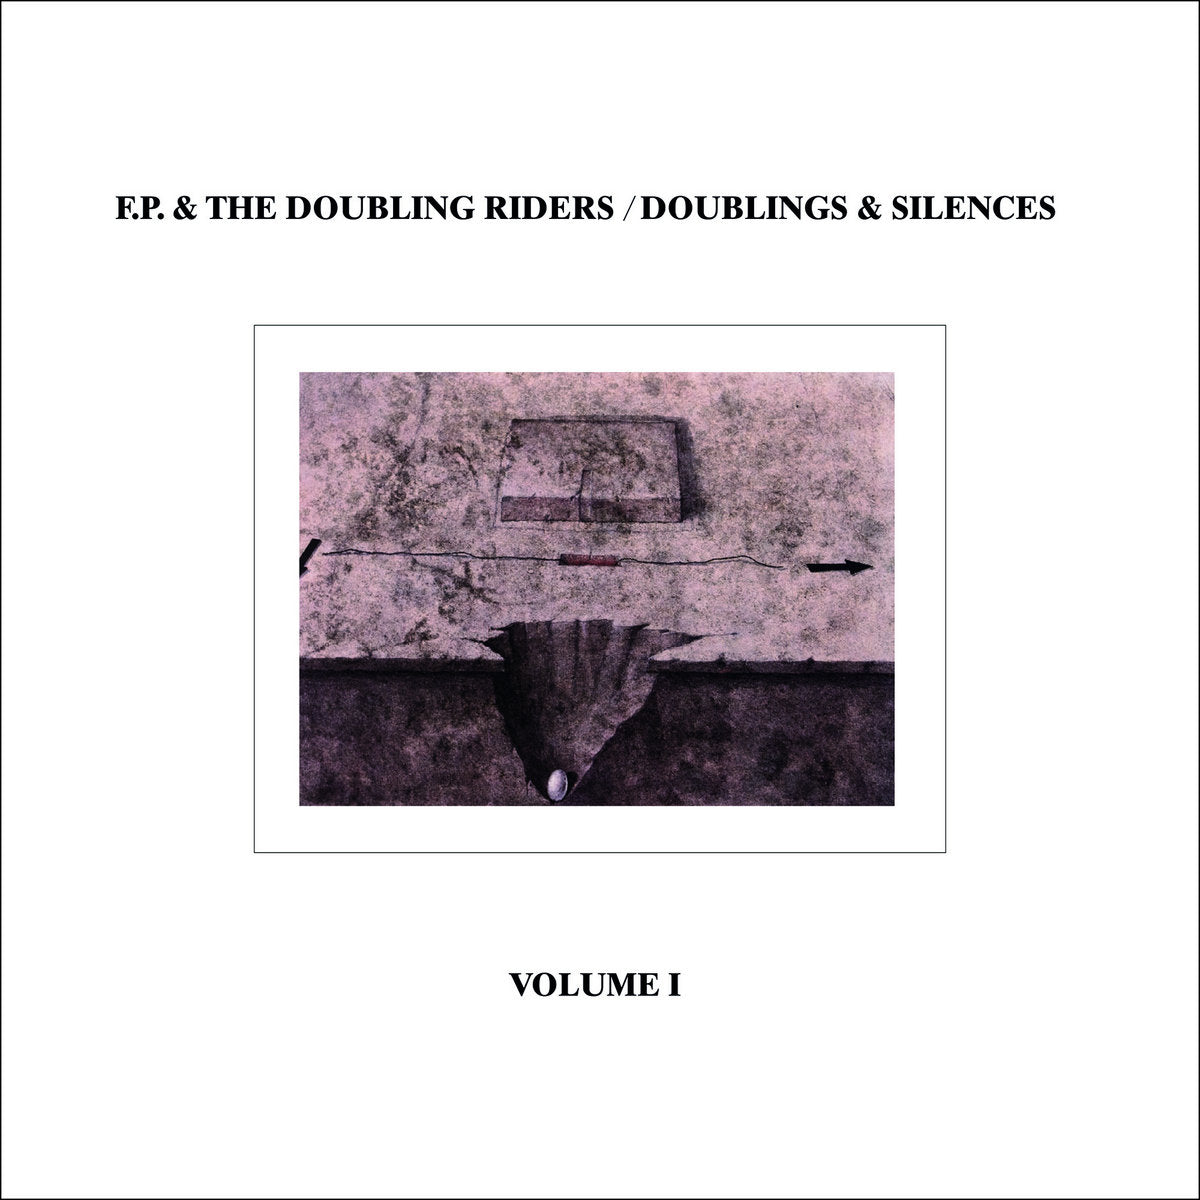 F.P & The Doubling Riders - Doublings & Silences Vol. I LP